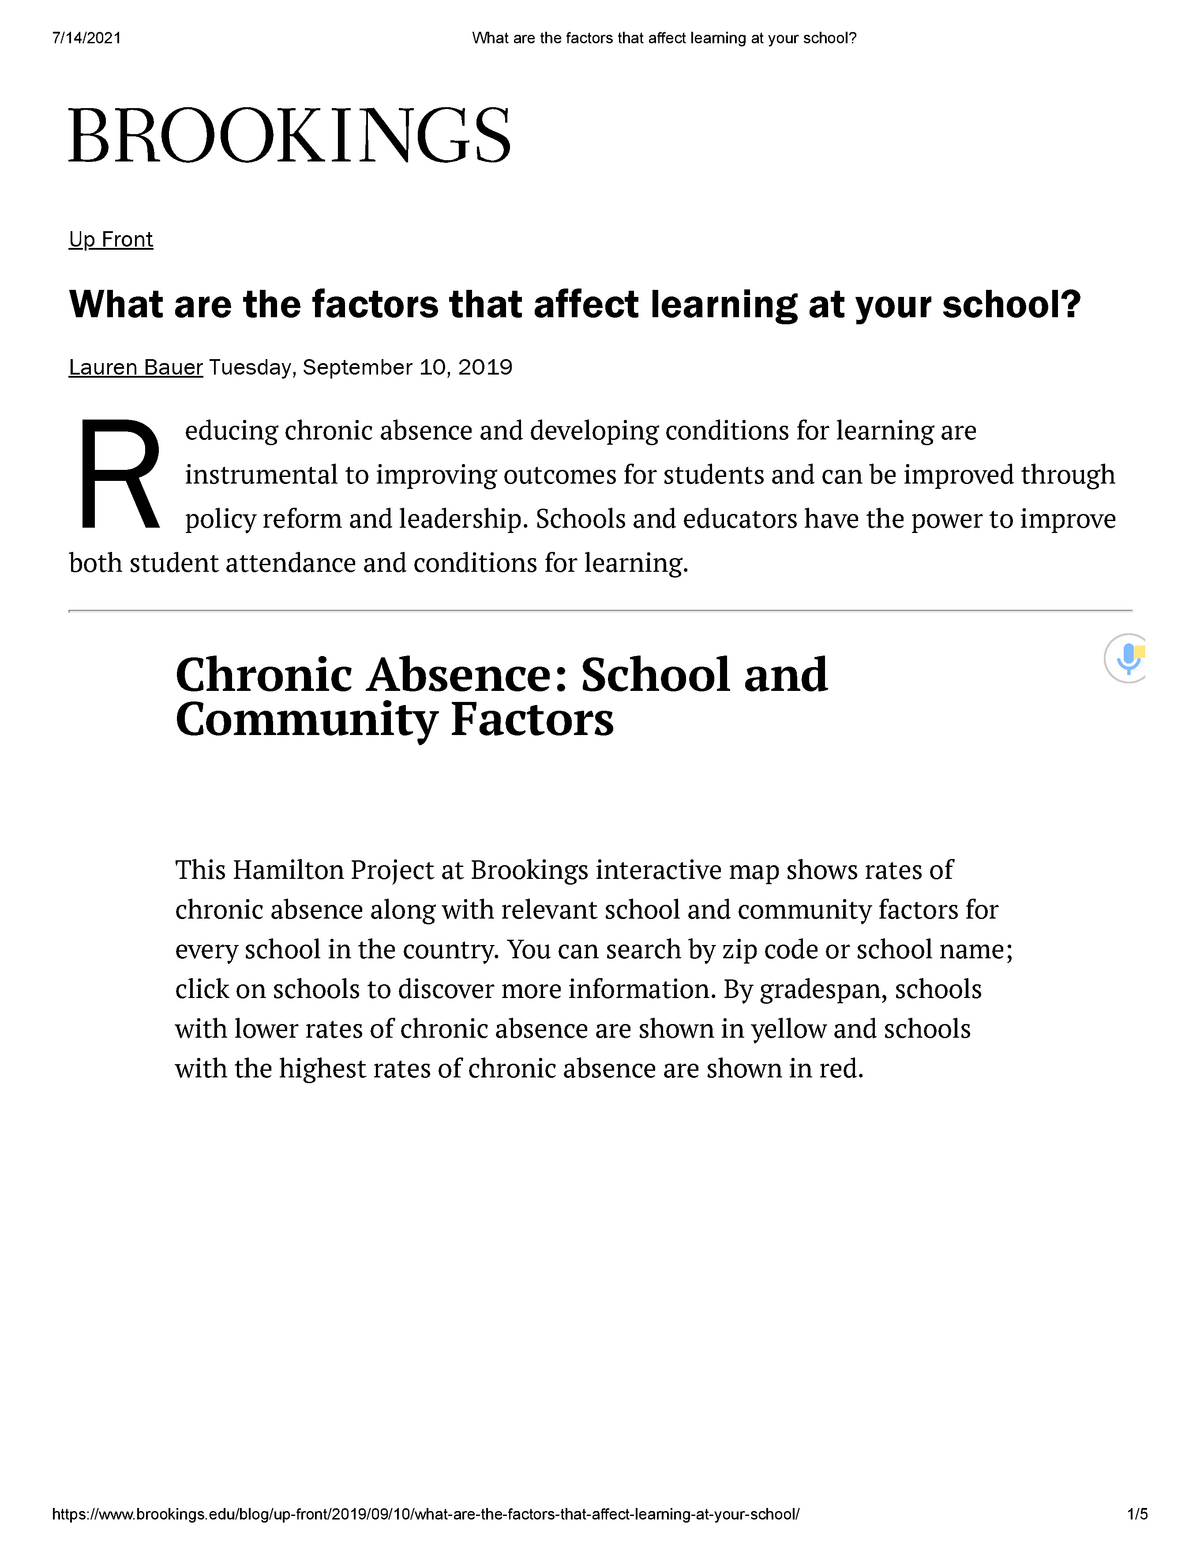 what-are-the-factors-that-affect-learning-at-your-school-r-up-front